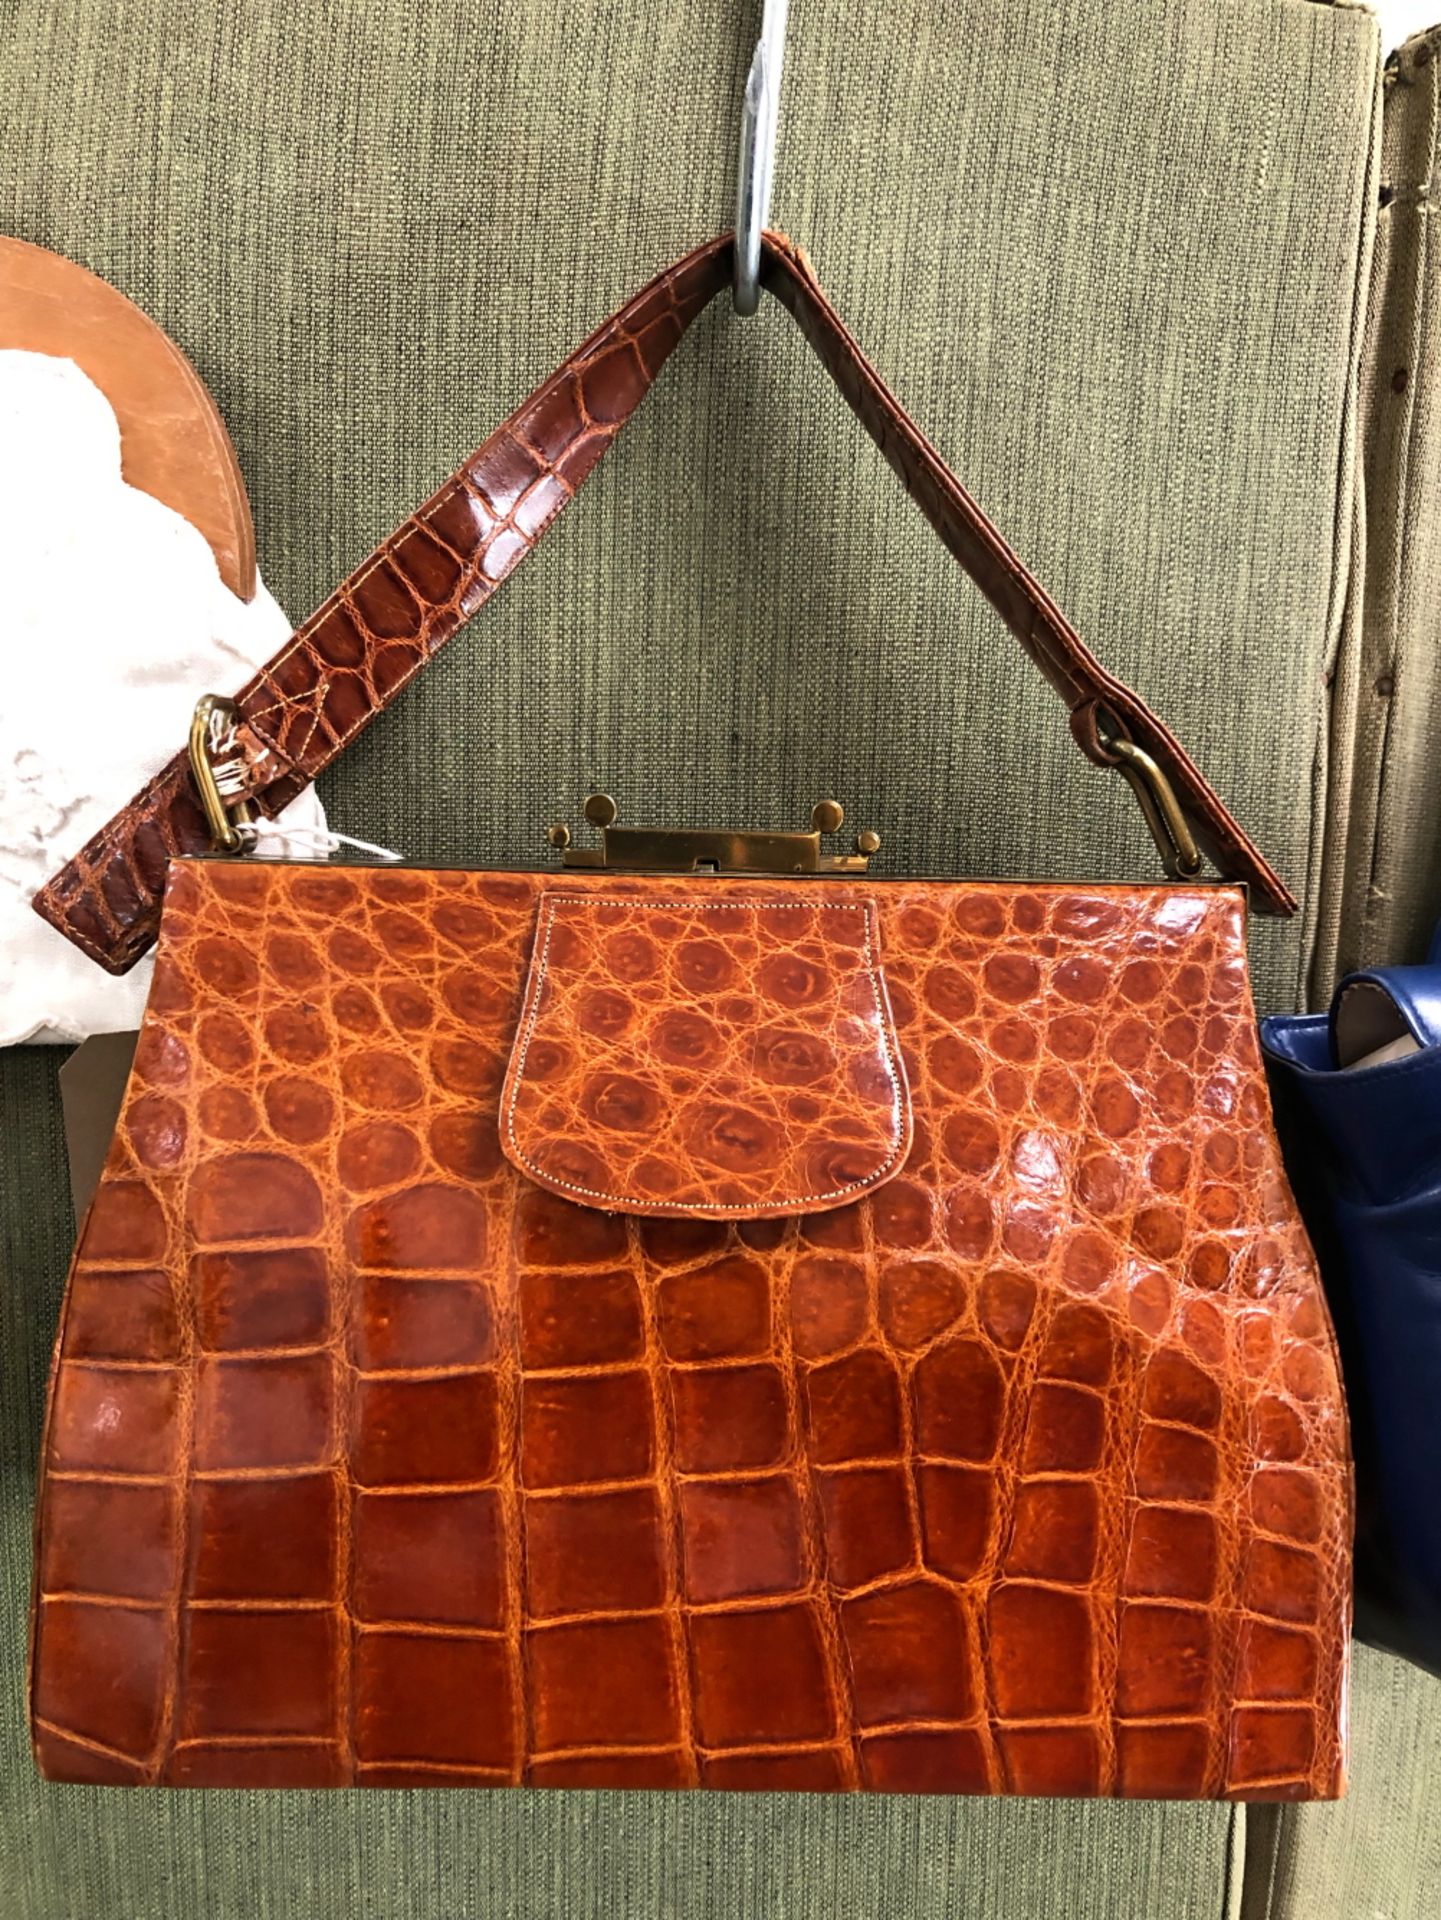 BAGS. A BAG CRAFT OF LONDON BLUE LEATHER BAG, TOGETHER WITH A CROCODILE EFFECT BROWN HANDBAG AND TWO - Image 3 of 5